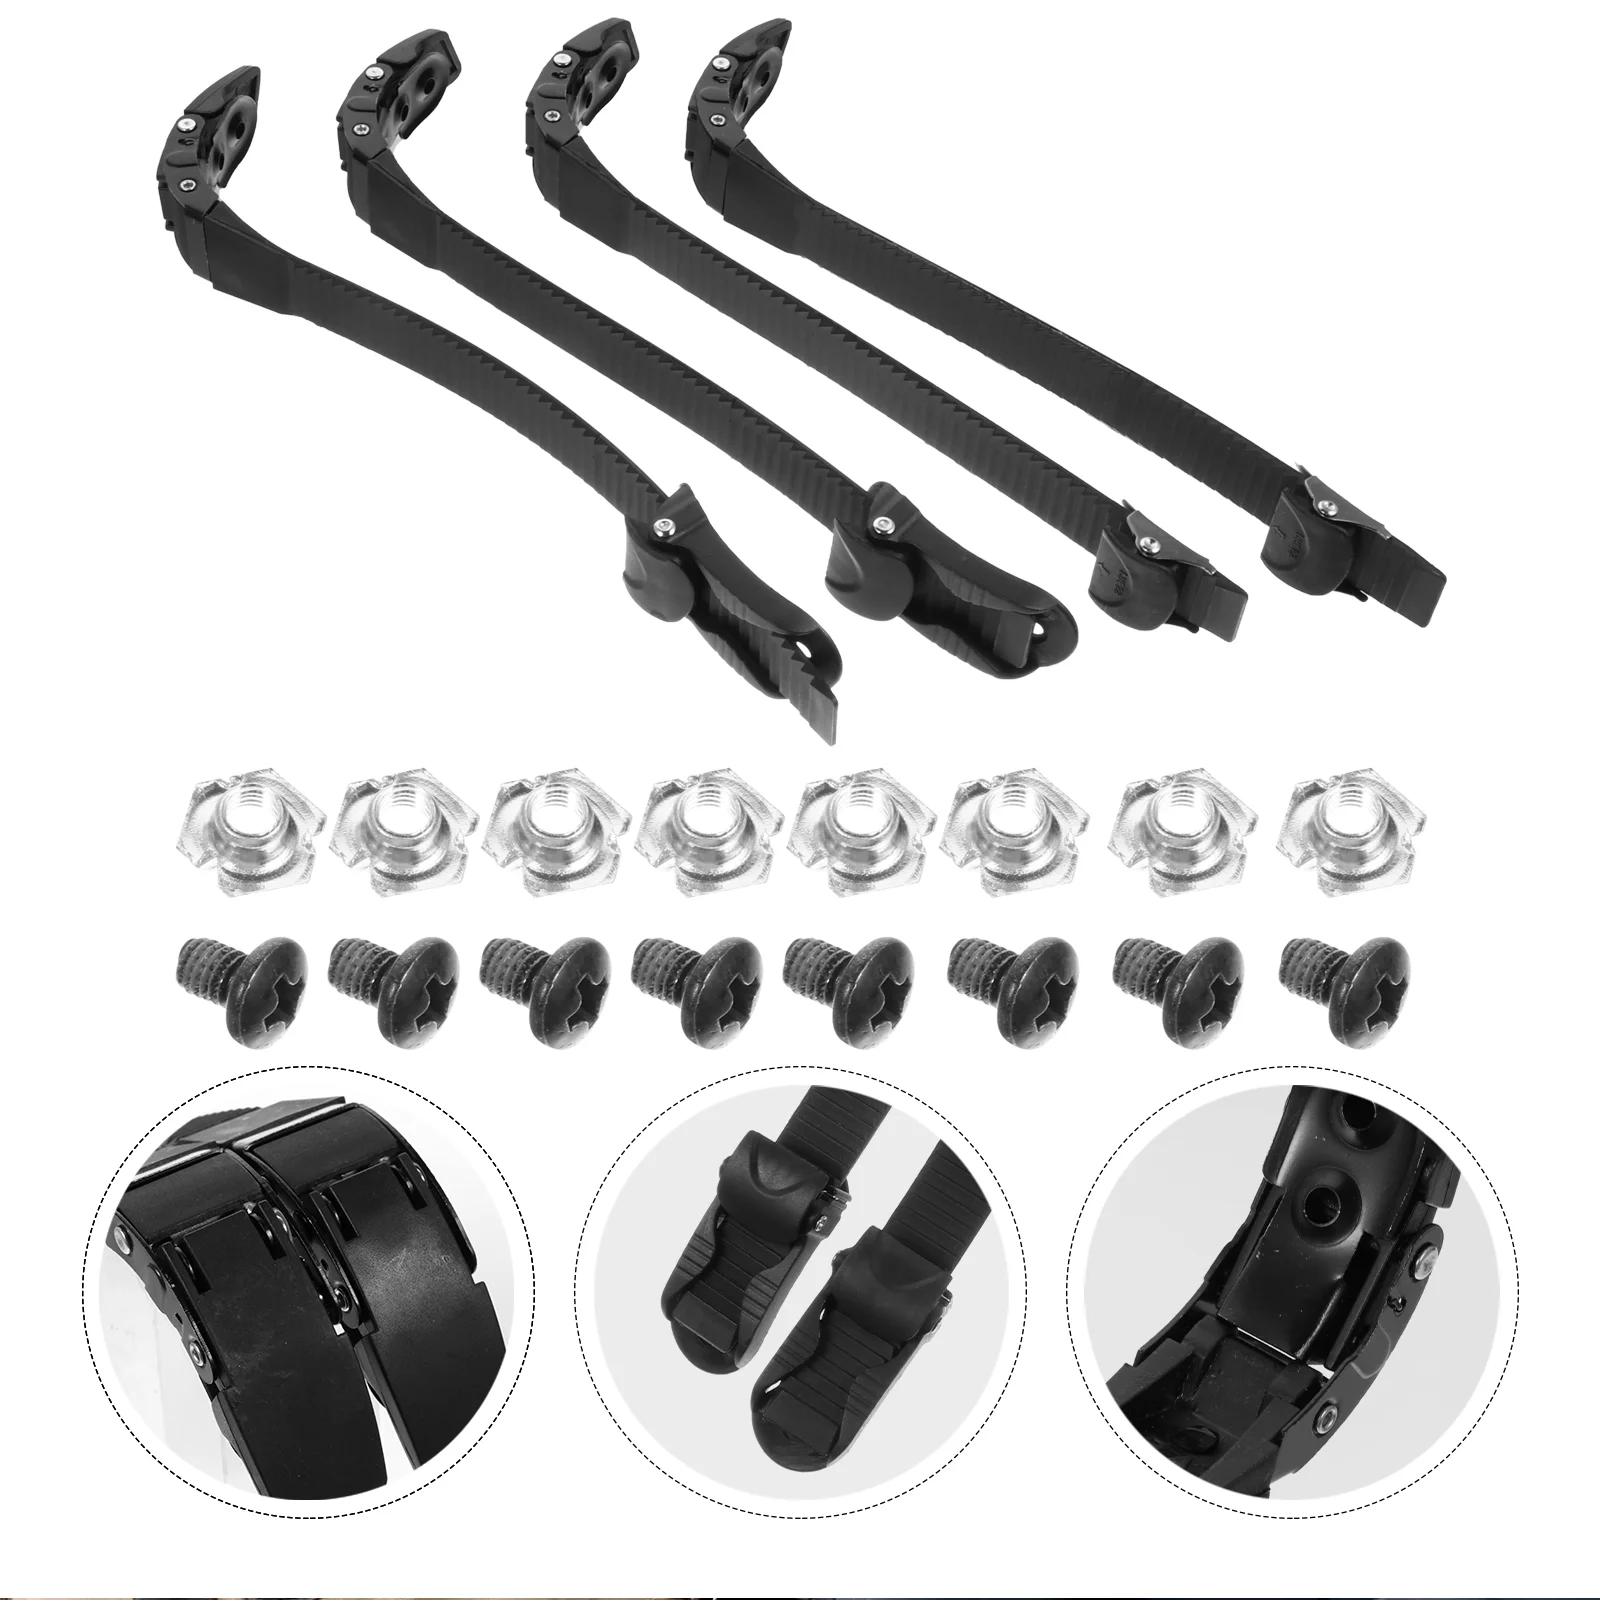 

Strap Inline Buckle Roller Skating Shoes Replacement Energy Buckles Shoe Belt Accessory Straps Screw Screws Accessories Leash